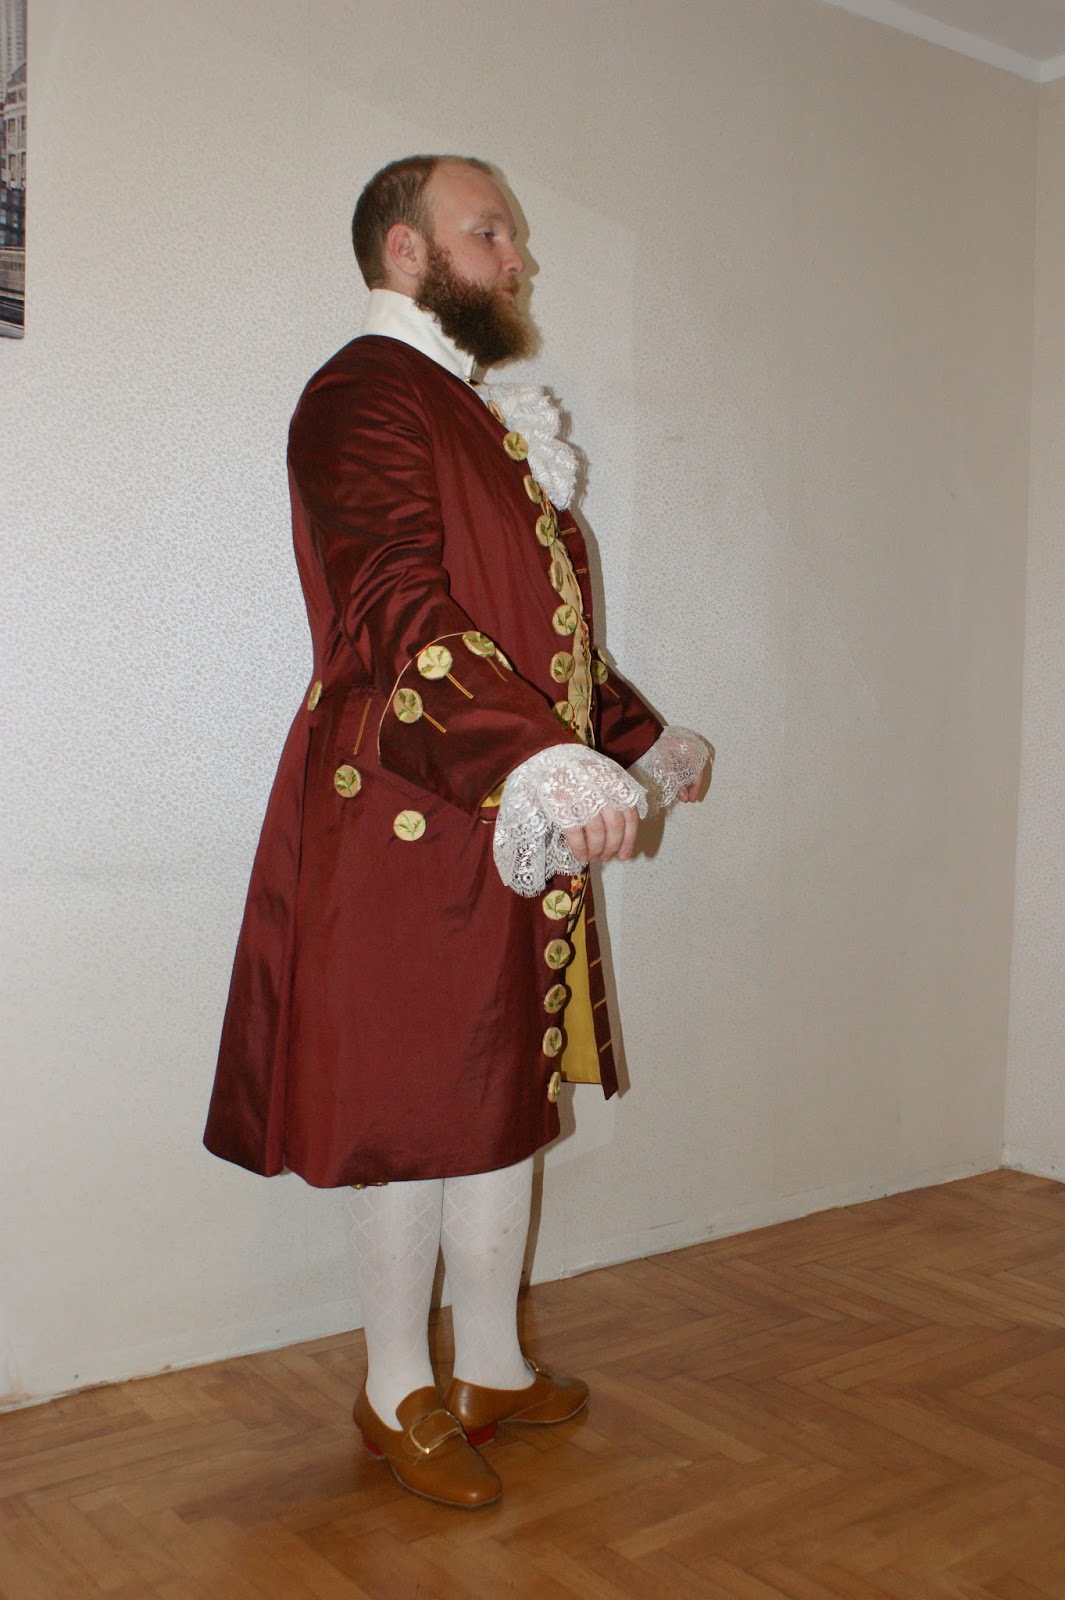 Sewing experiments: Men's 18th century outfit